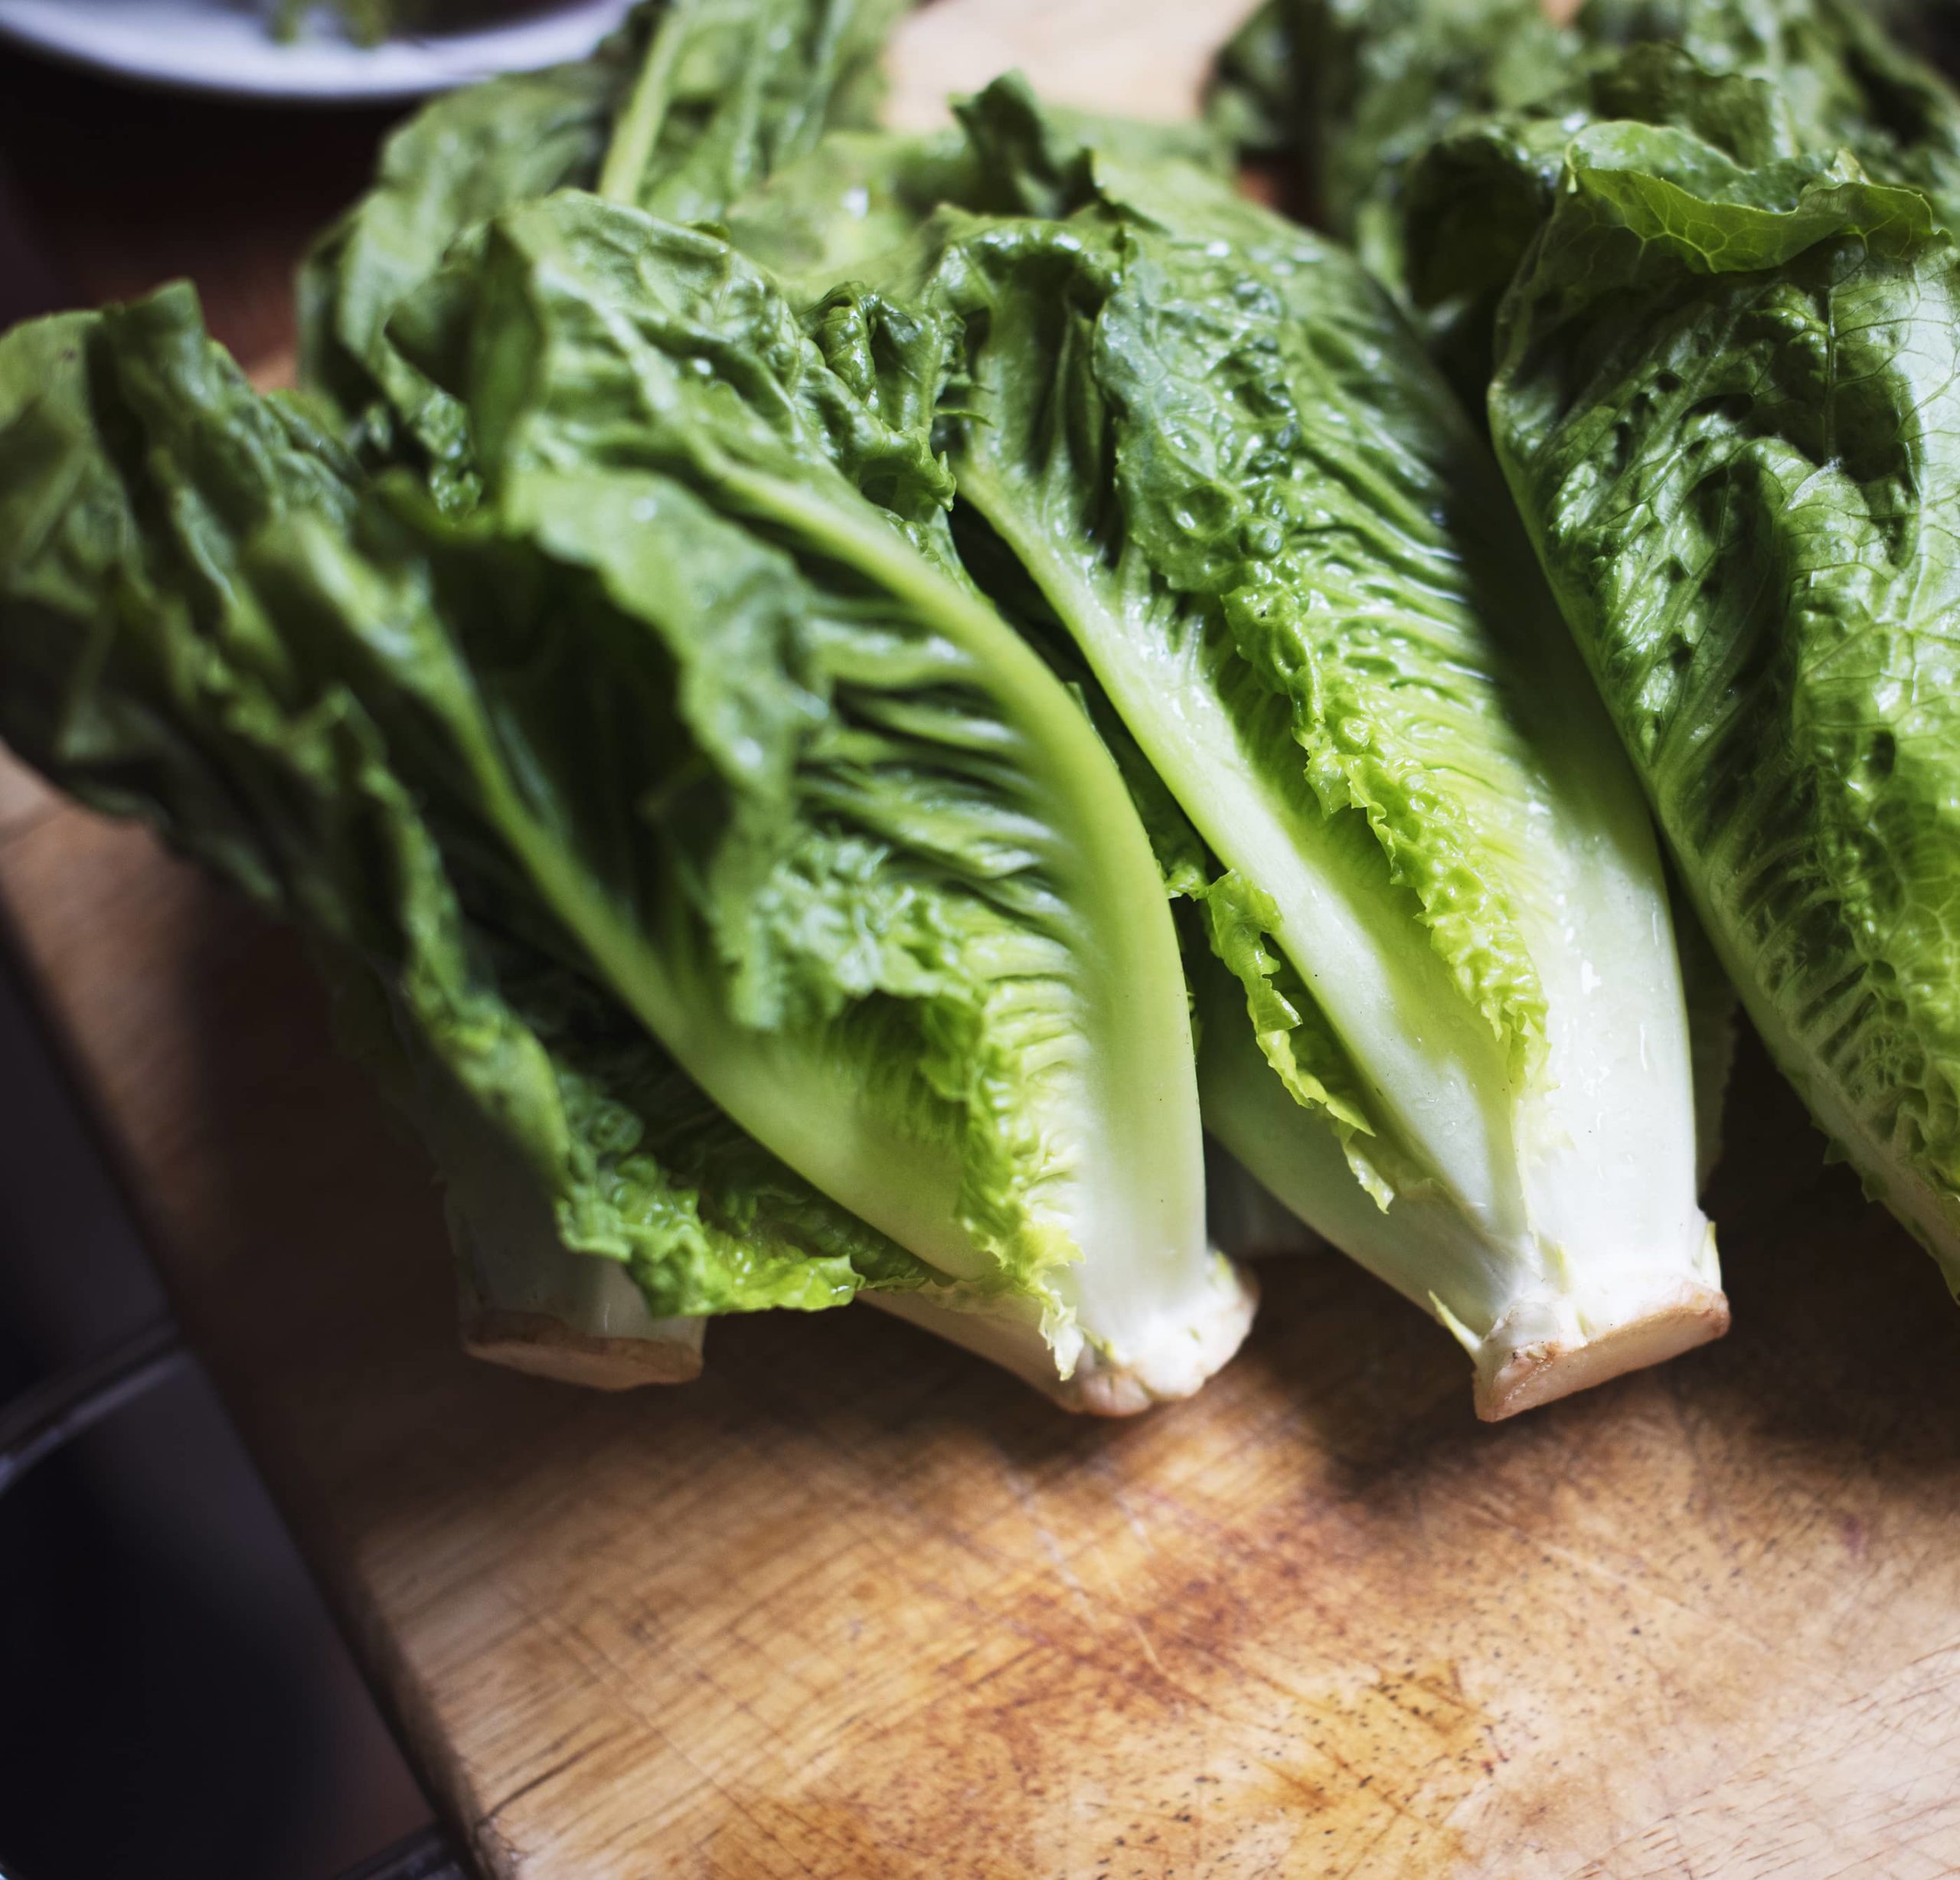 More People Sickened by Romaine Lettuce E. coli Outbreak